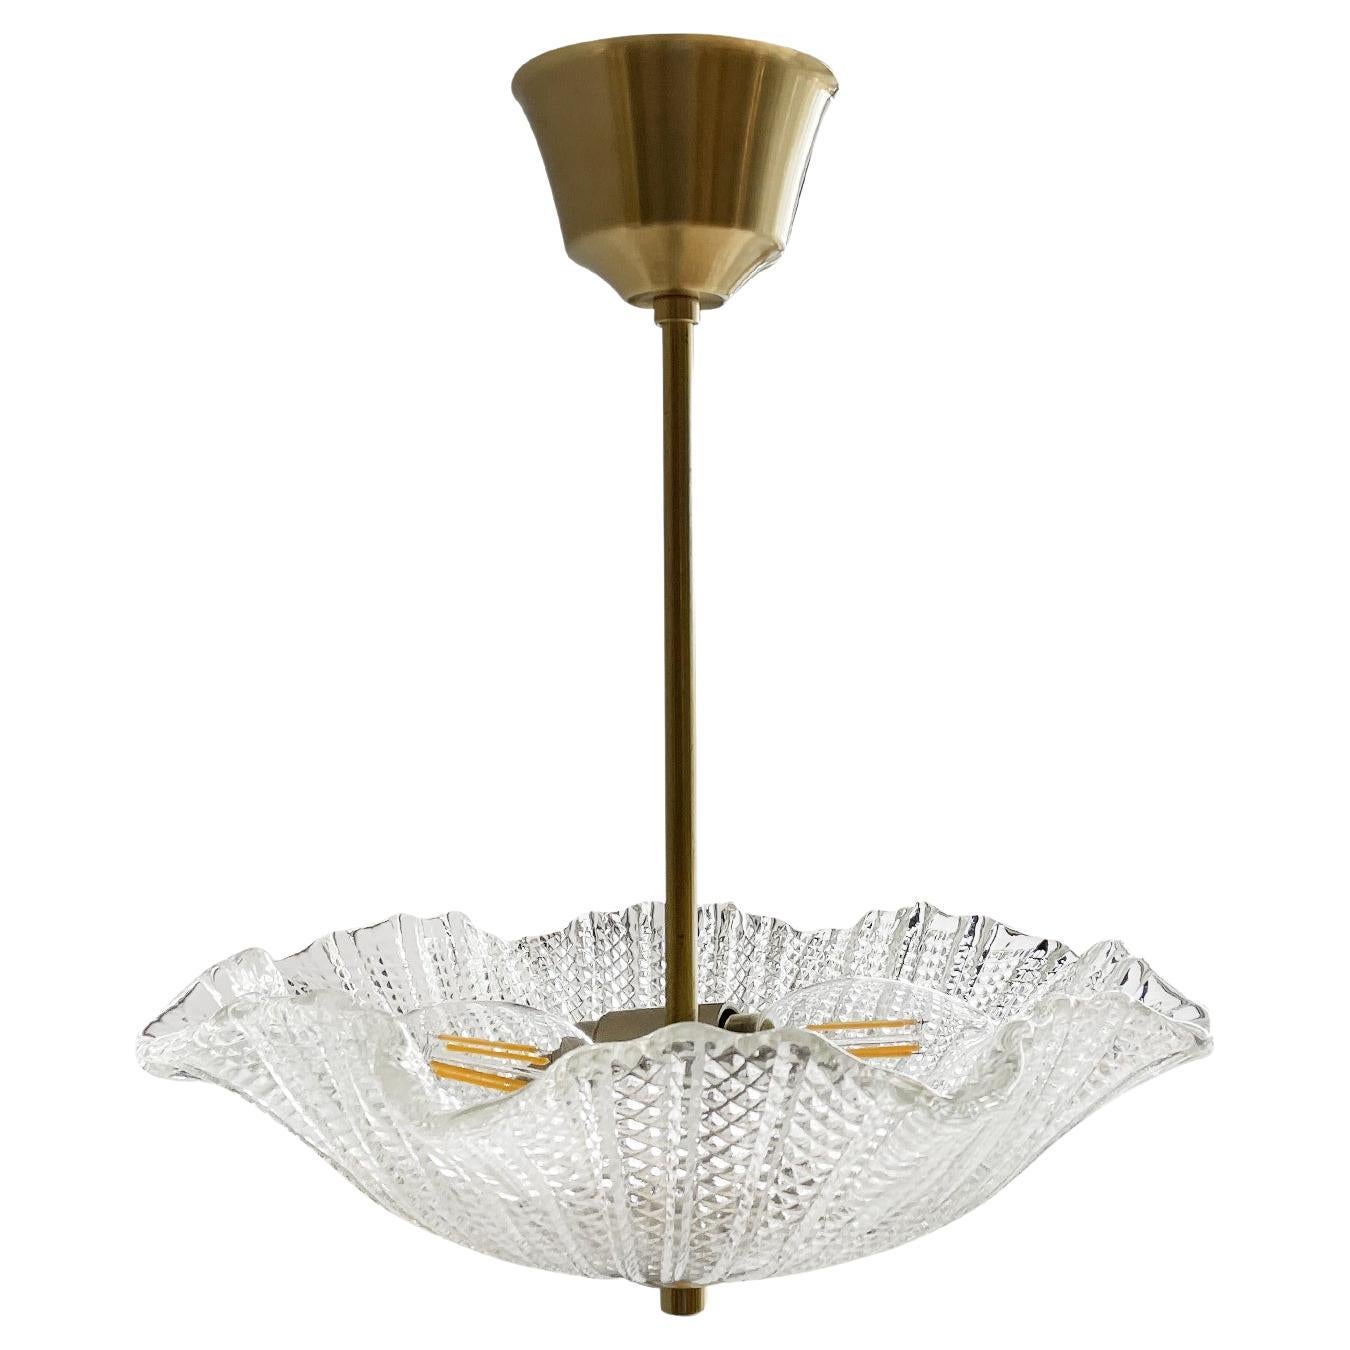 20th Century Swedish Smoked Glass Ceiling Light, Lamp Attributed to Orrefors